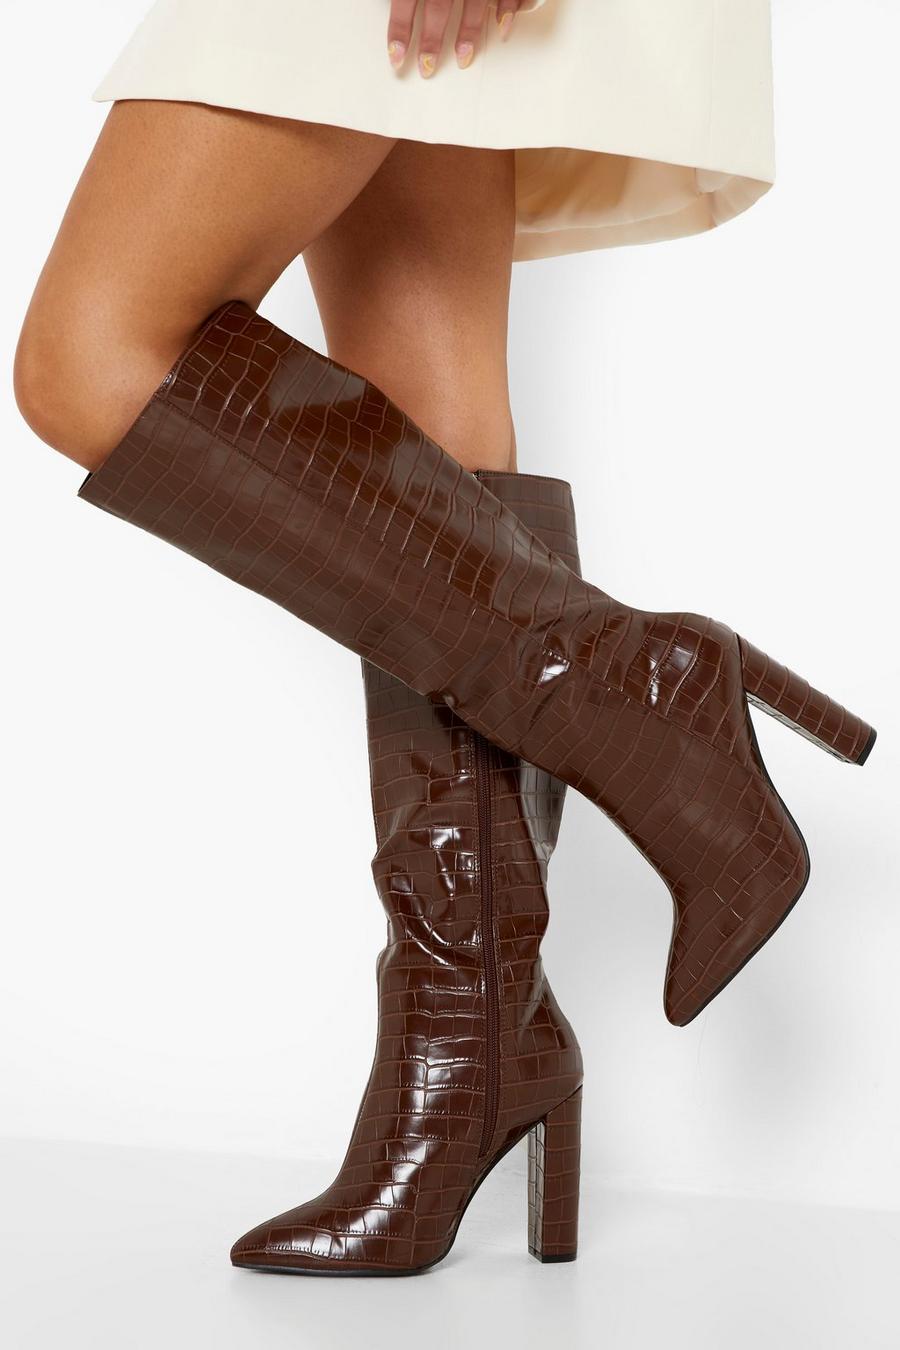 Chocolate marron Wide Fit Pointed Toe Croc Knee High Boots